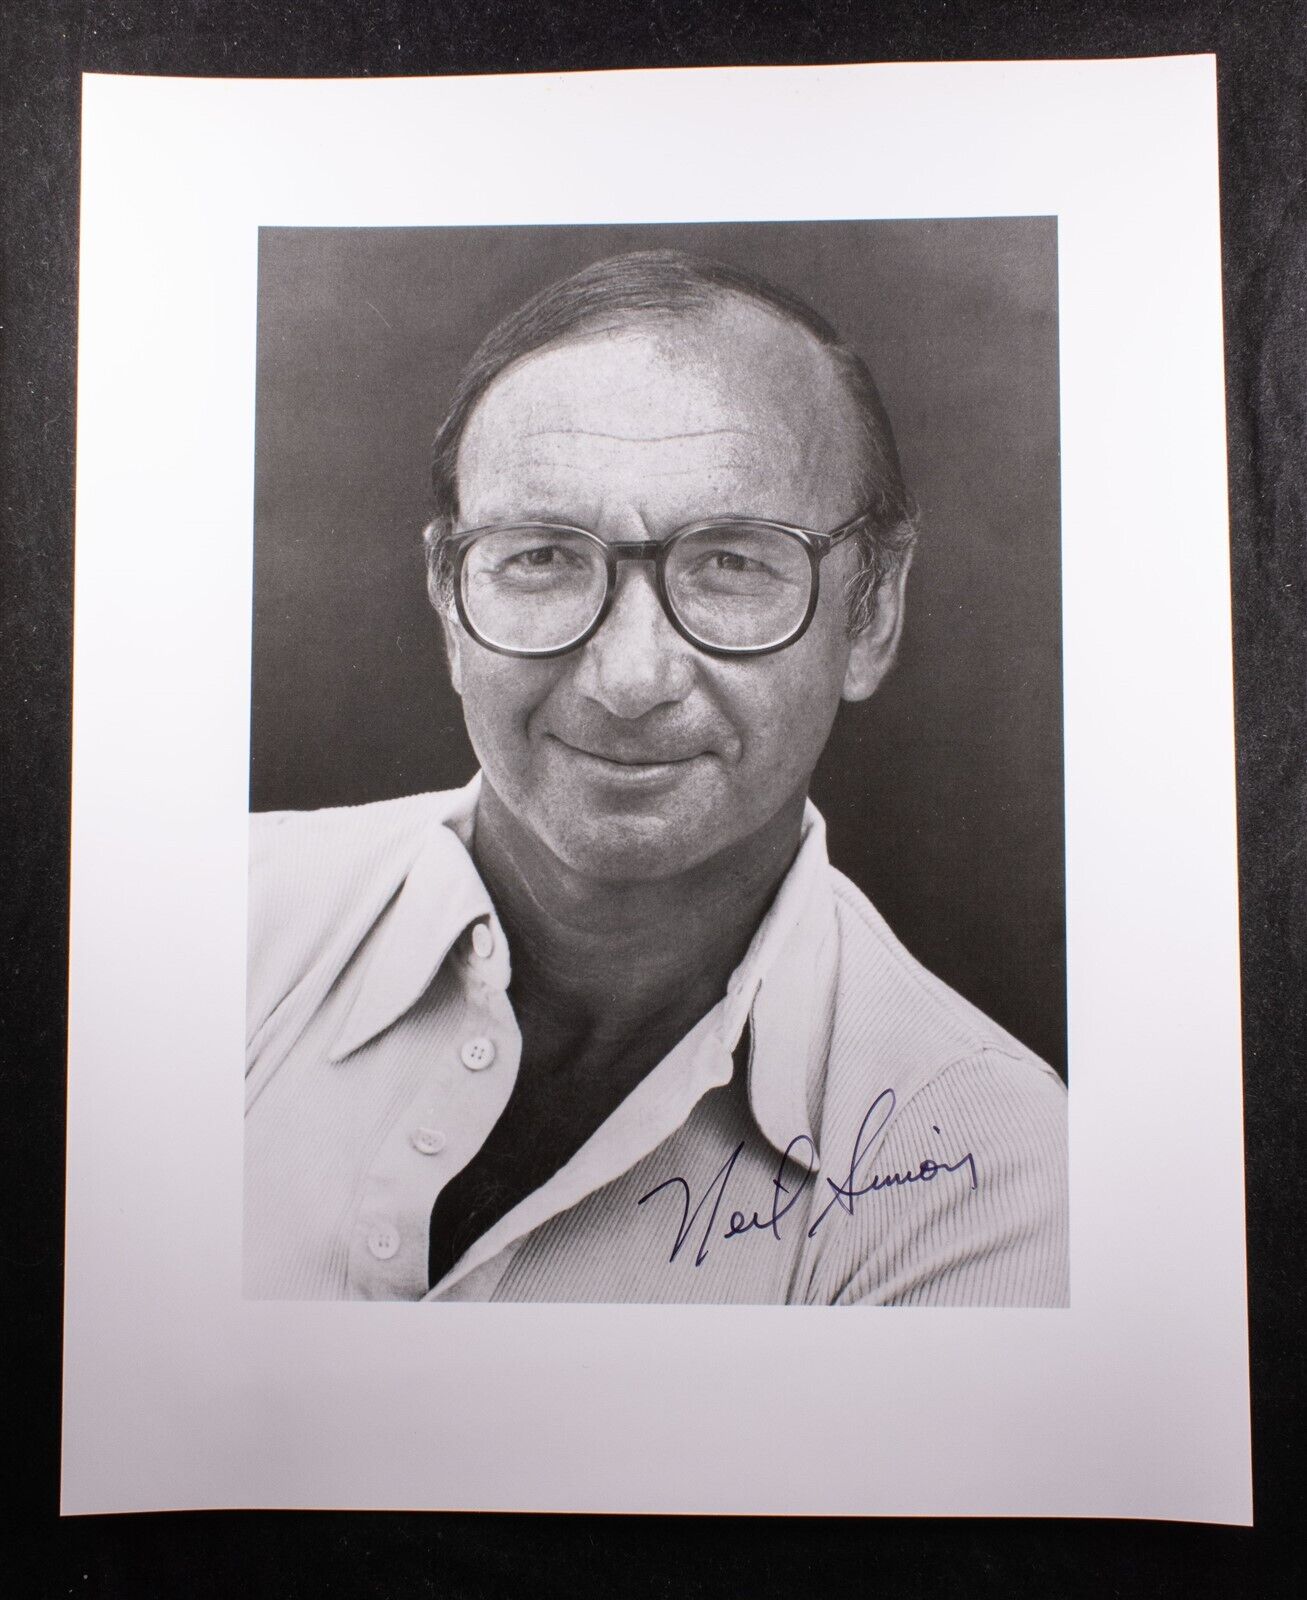 Neil Simon 8x10 Autographed Photo American Playwright Screenwriter and Author